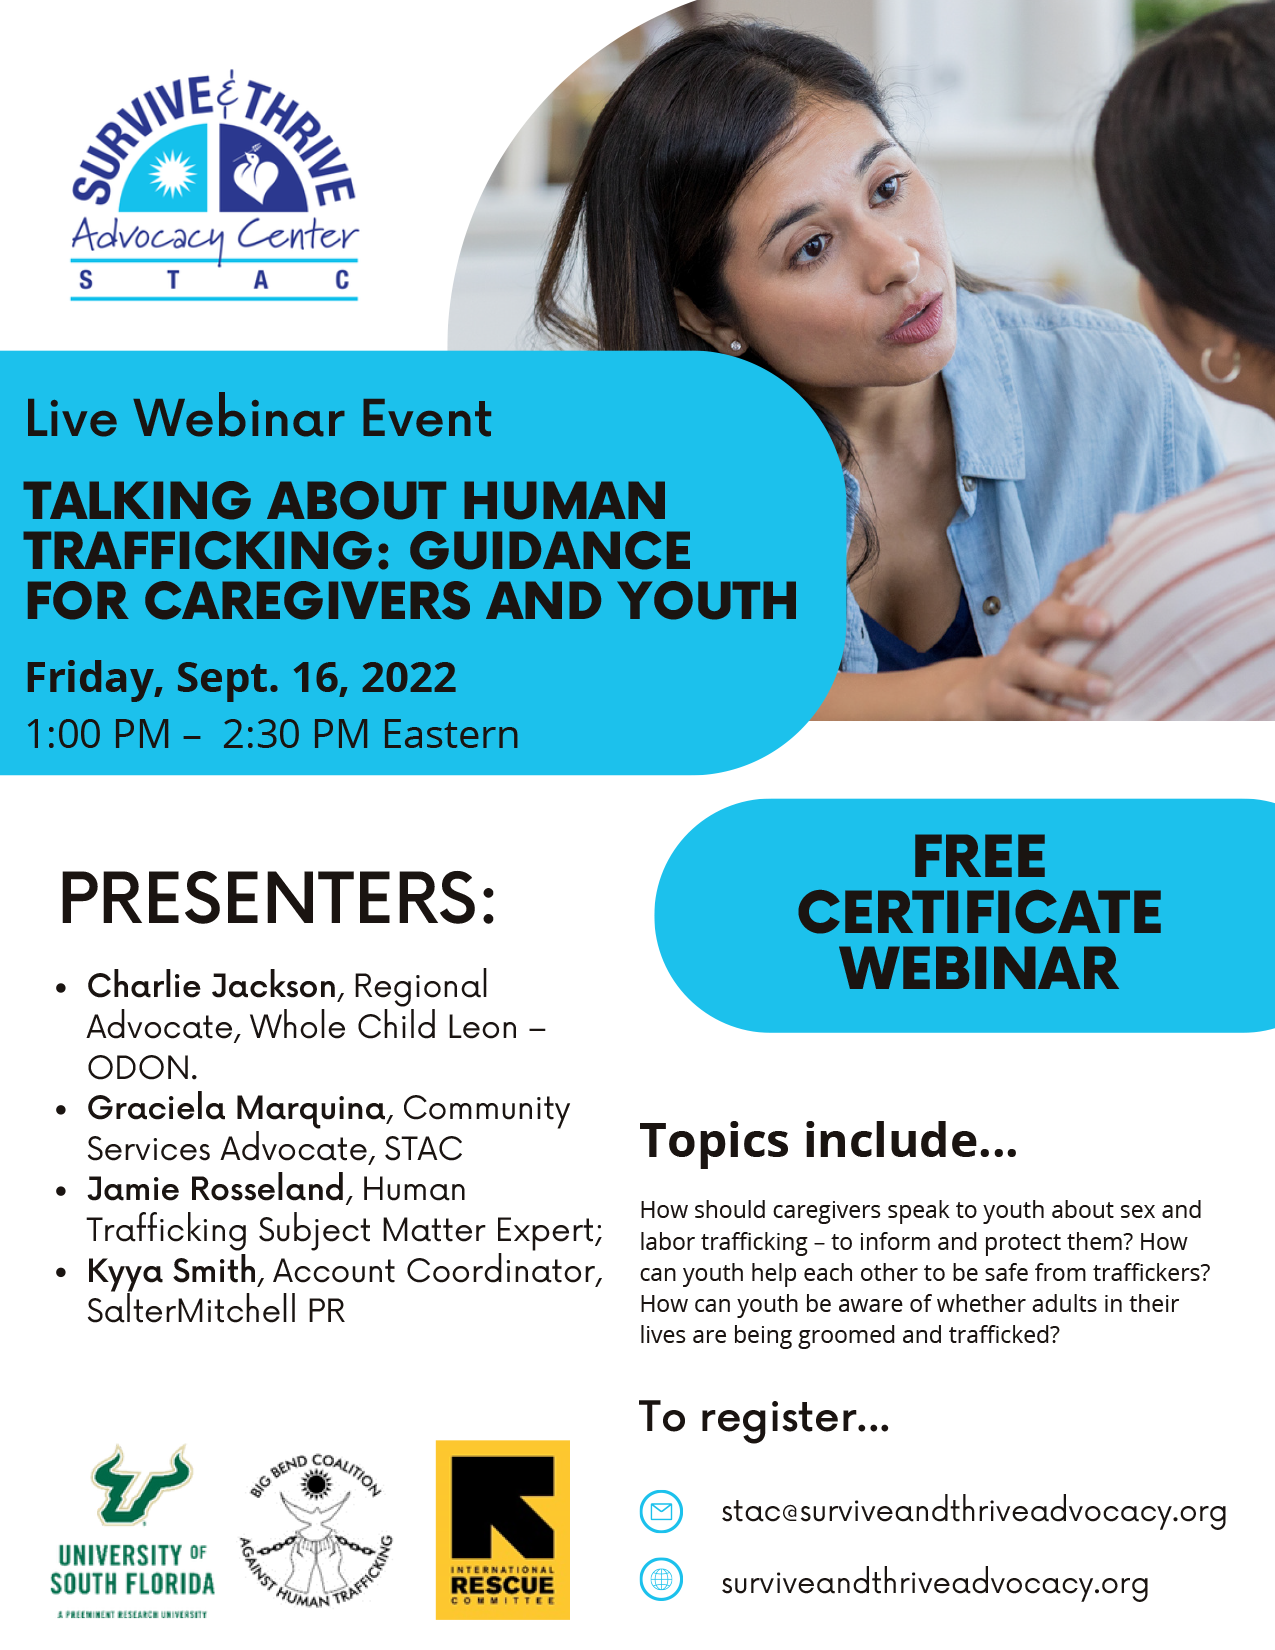 Human Trafficking Guidance for Caregivers and Youth